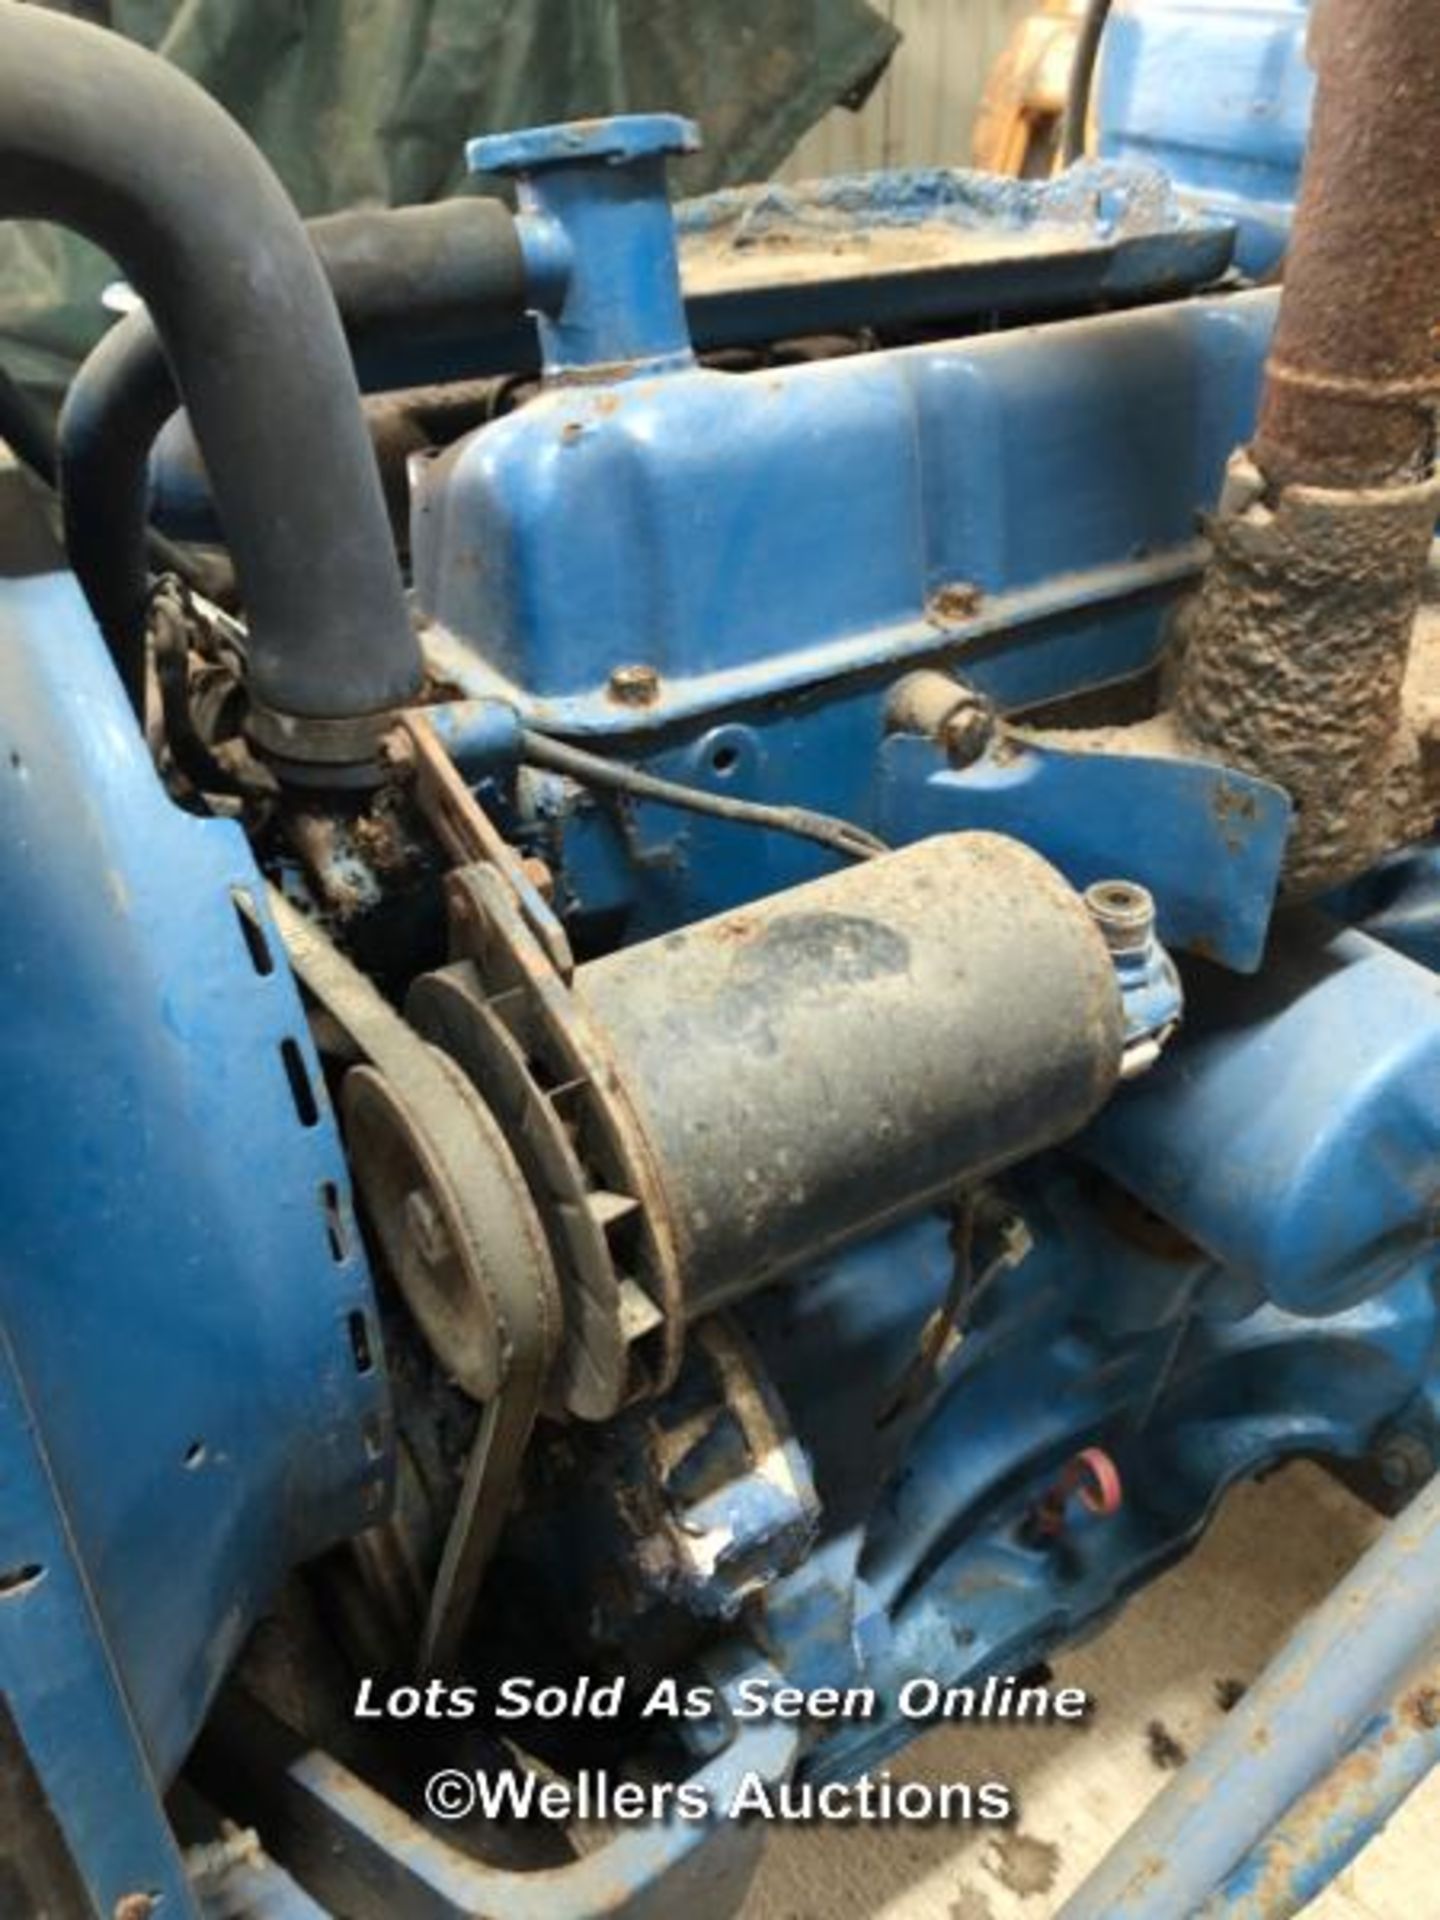 1968 FORD 3000 TRACTOR, REG: OTT 696G, DIESEL ENGINE, INIDCATING 4028 HOURS, INCL. LOGBOOK, LARGE - Image 10 of 29